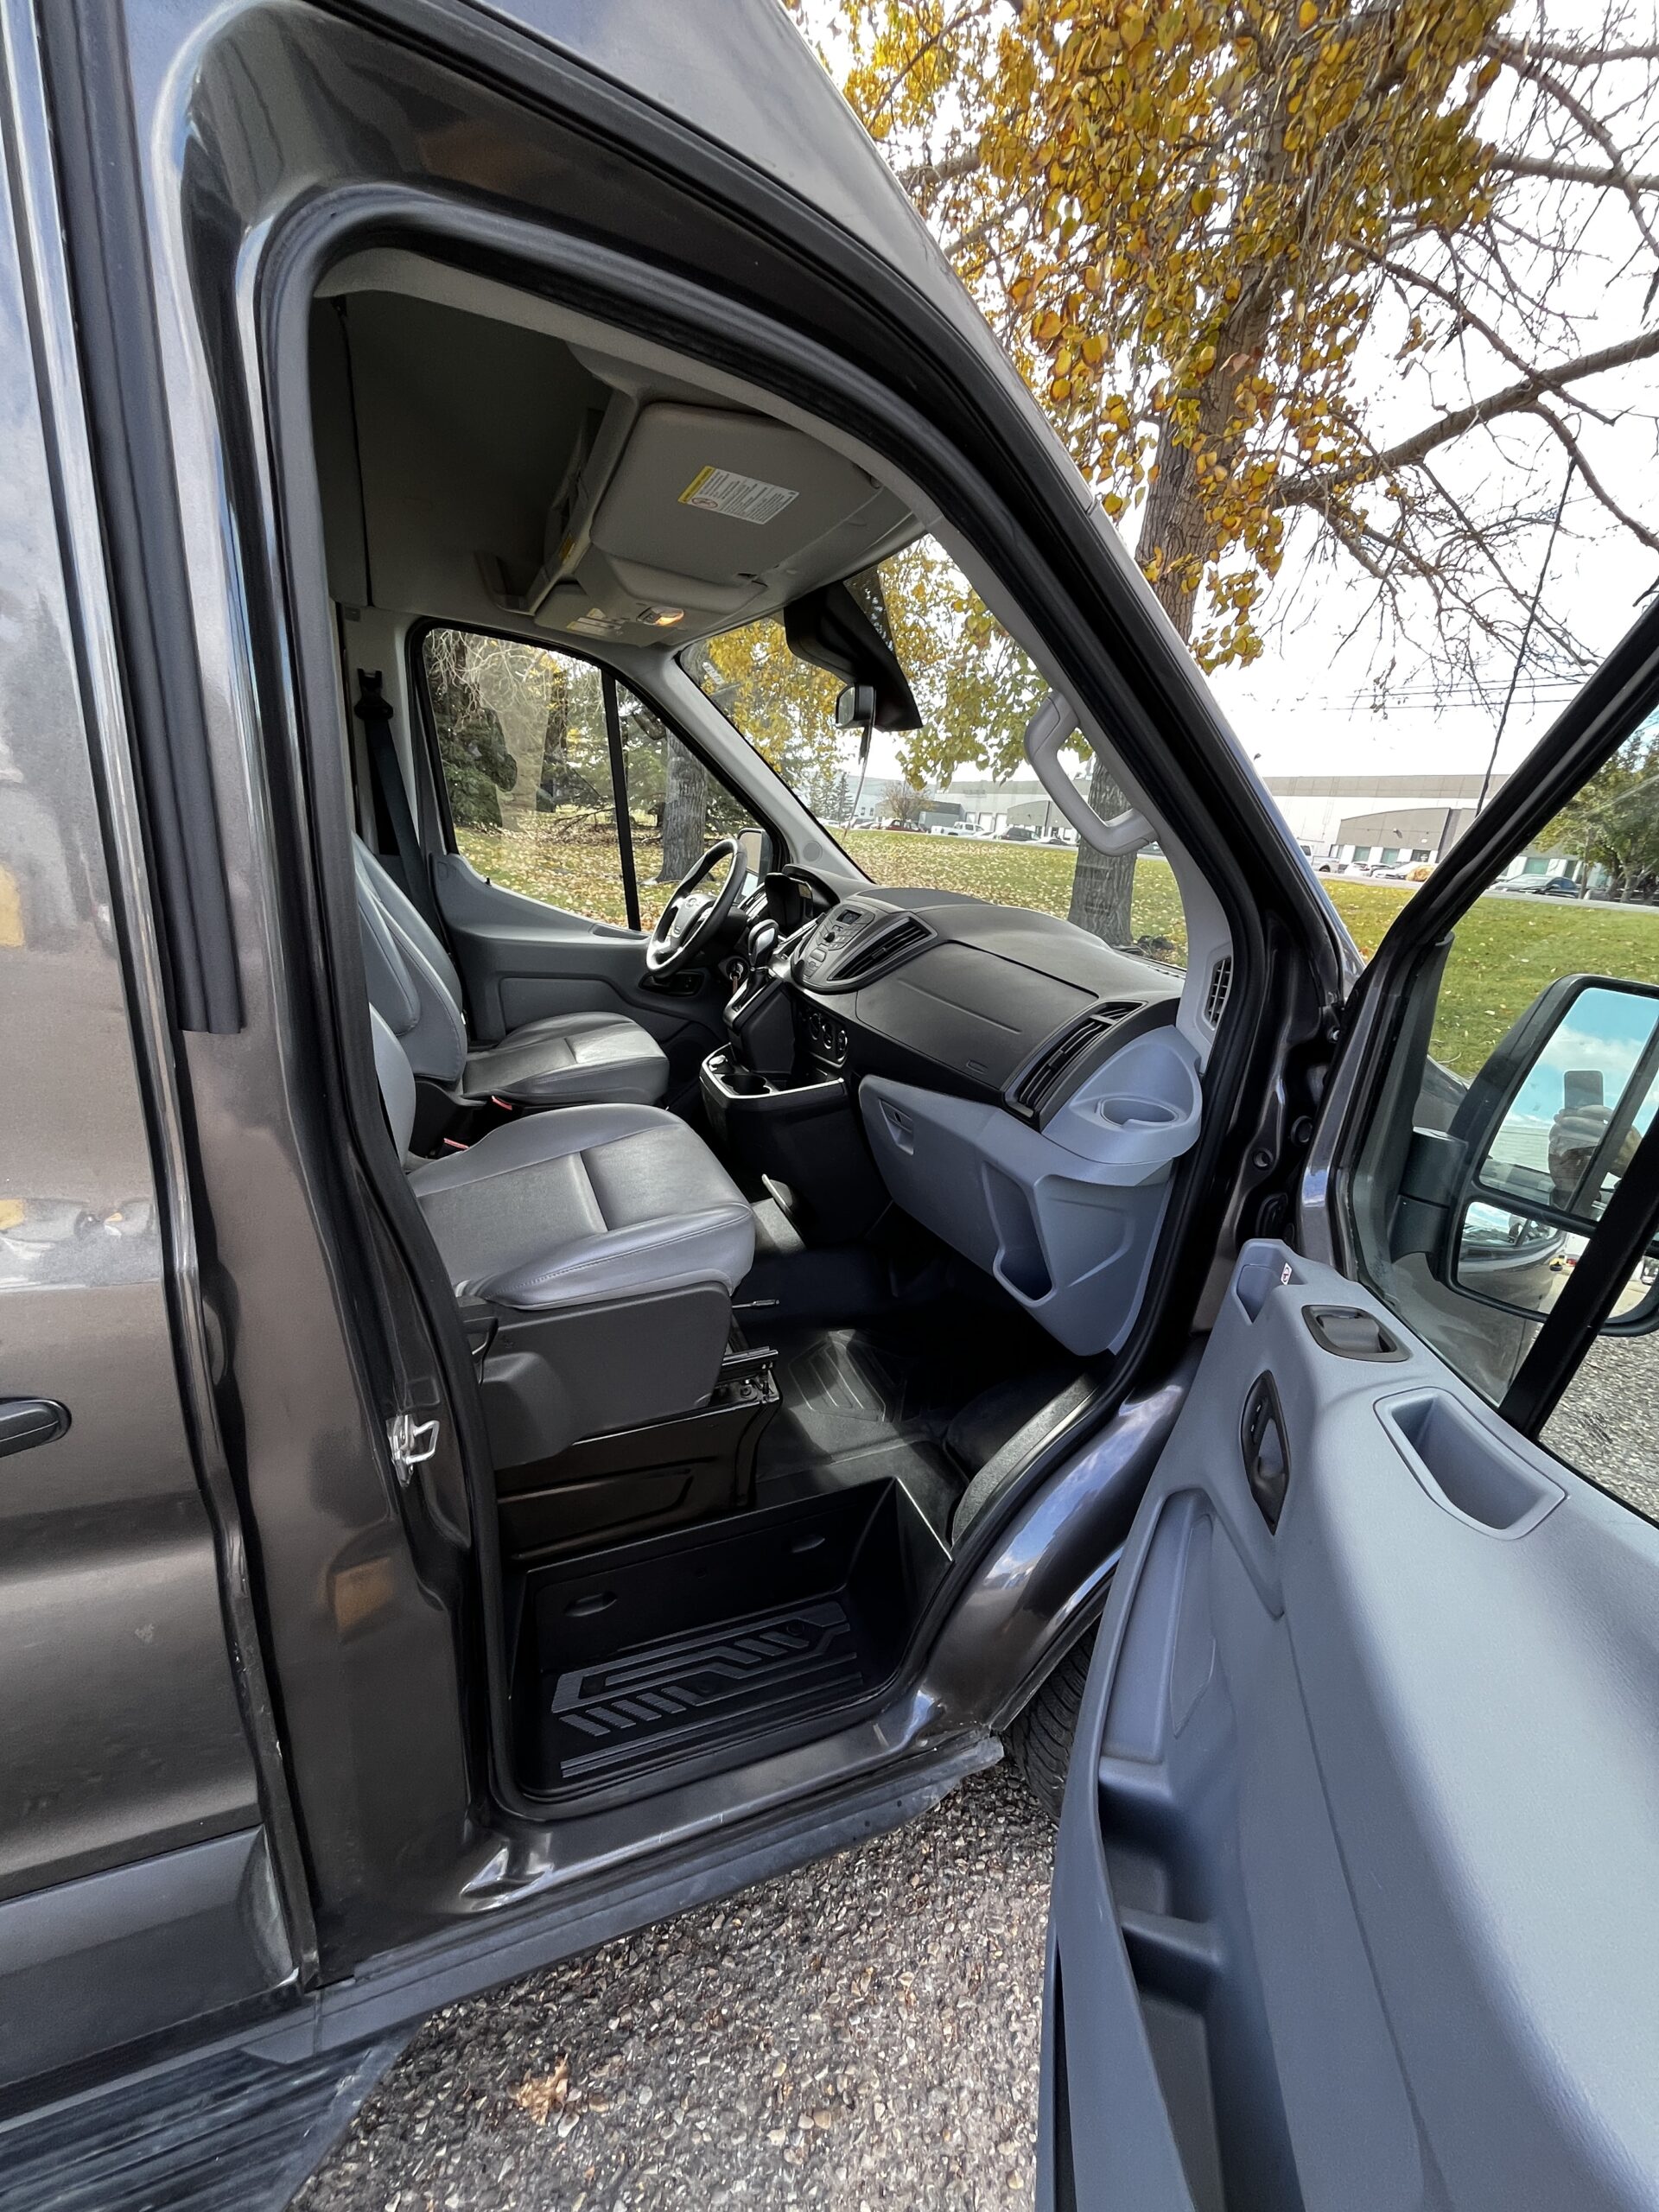 interior view of a driver and passenger seat within a camper van